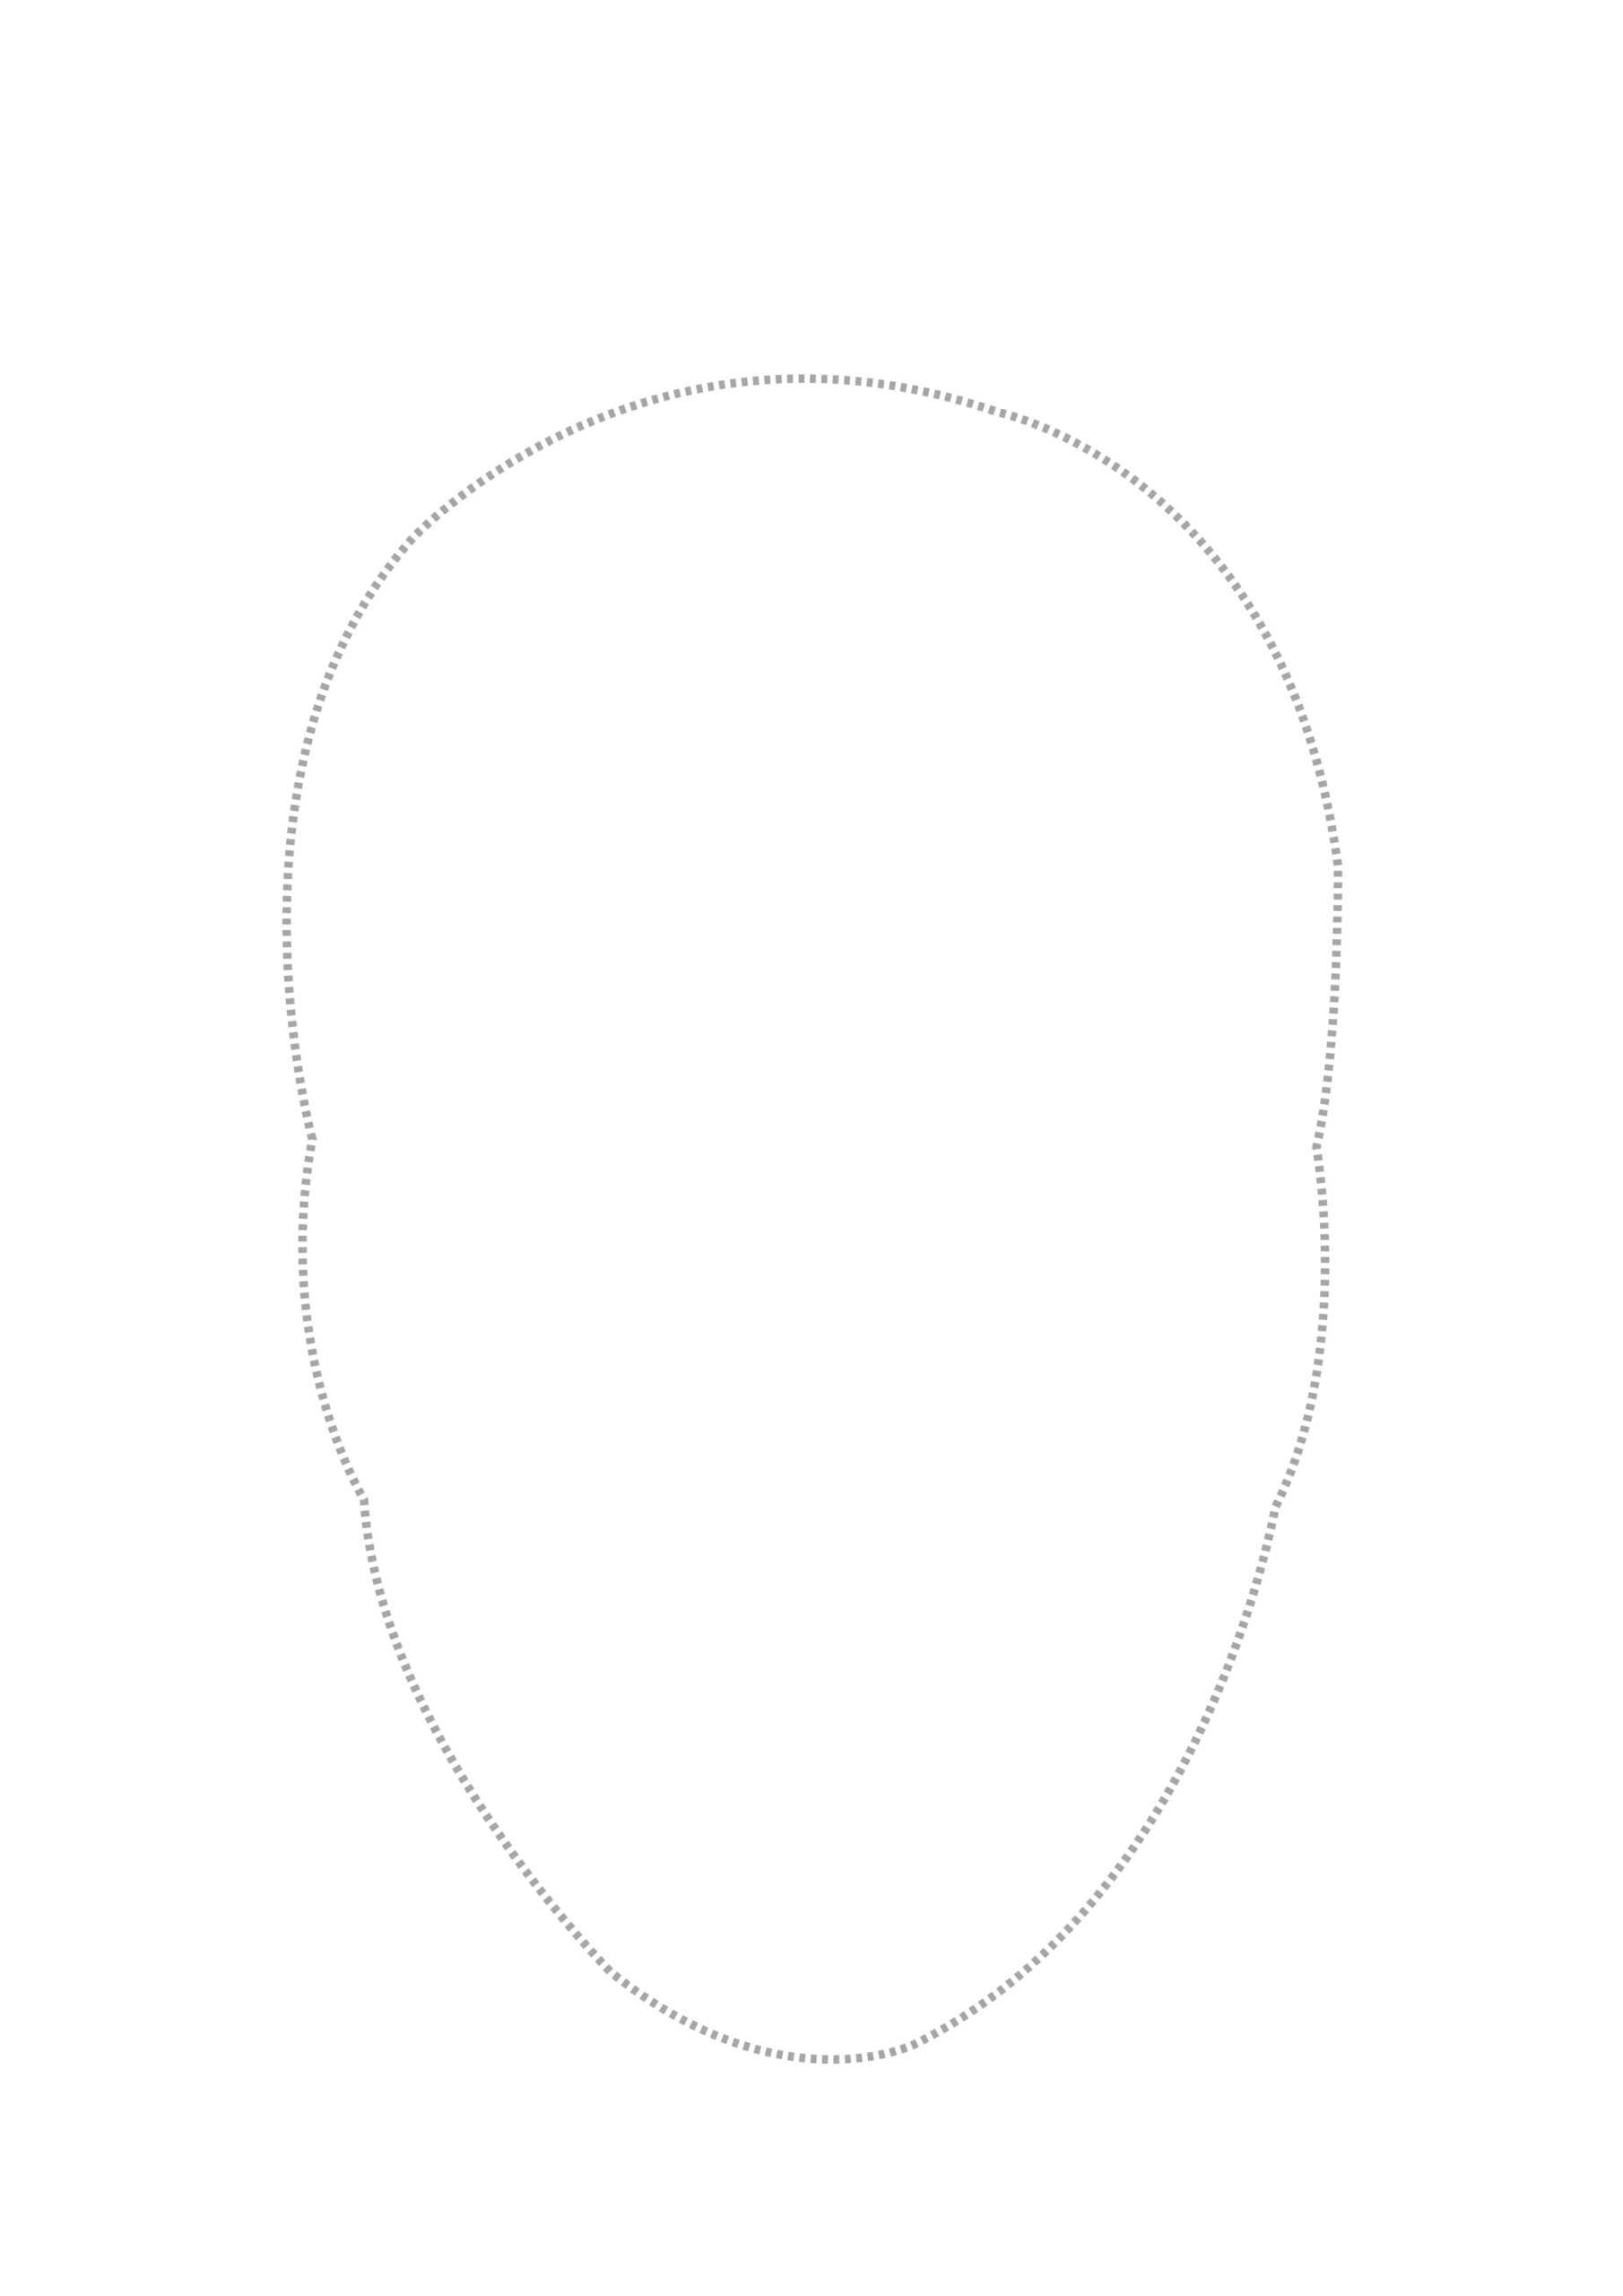 Free Face Outline Template, Download Free Clip Art, Free With Blank Face Template Preschool